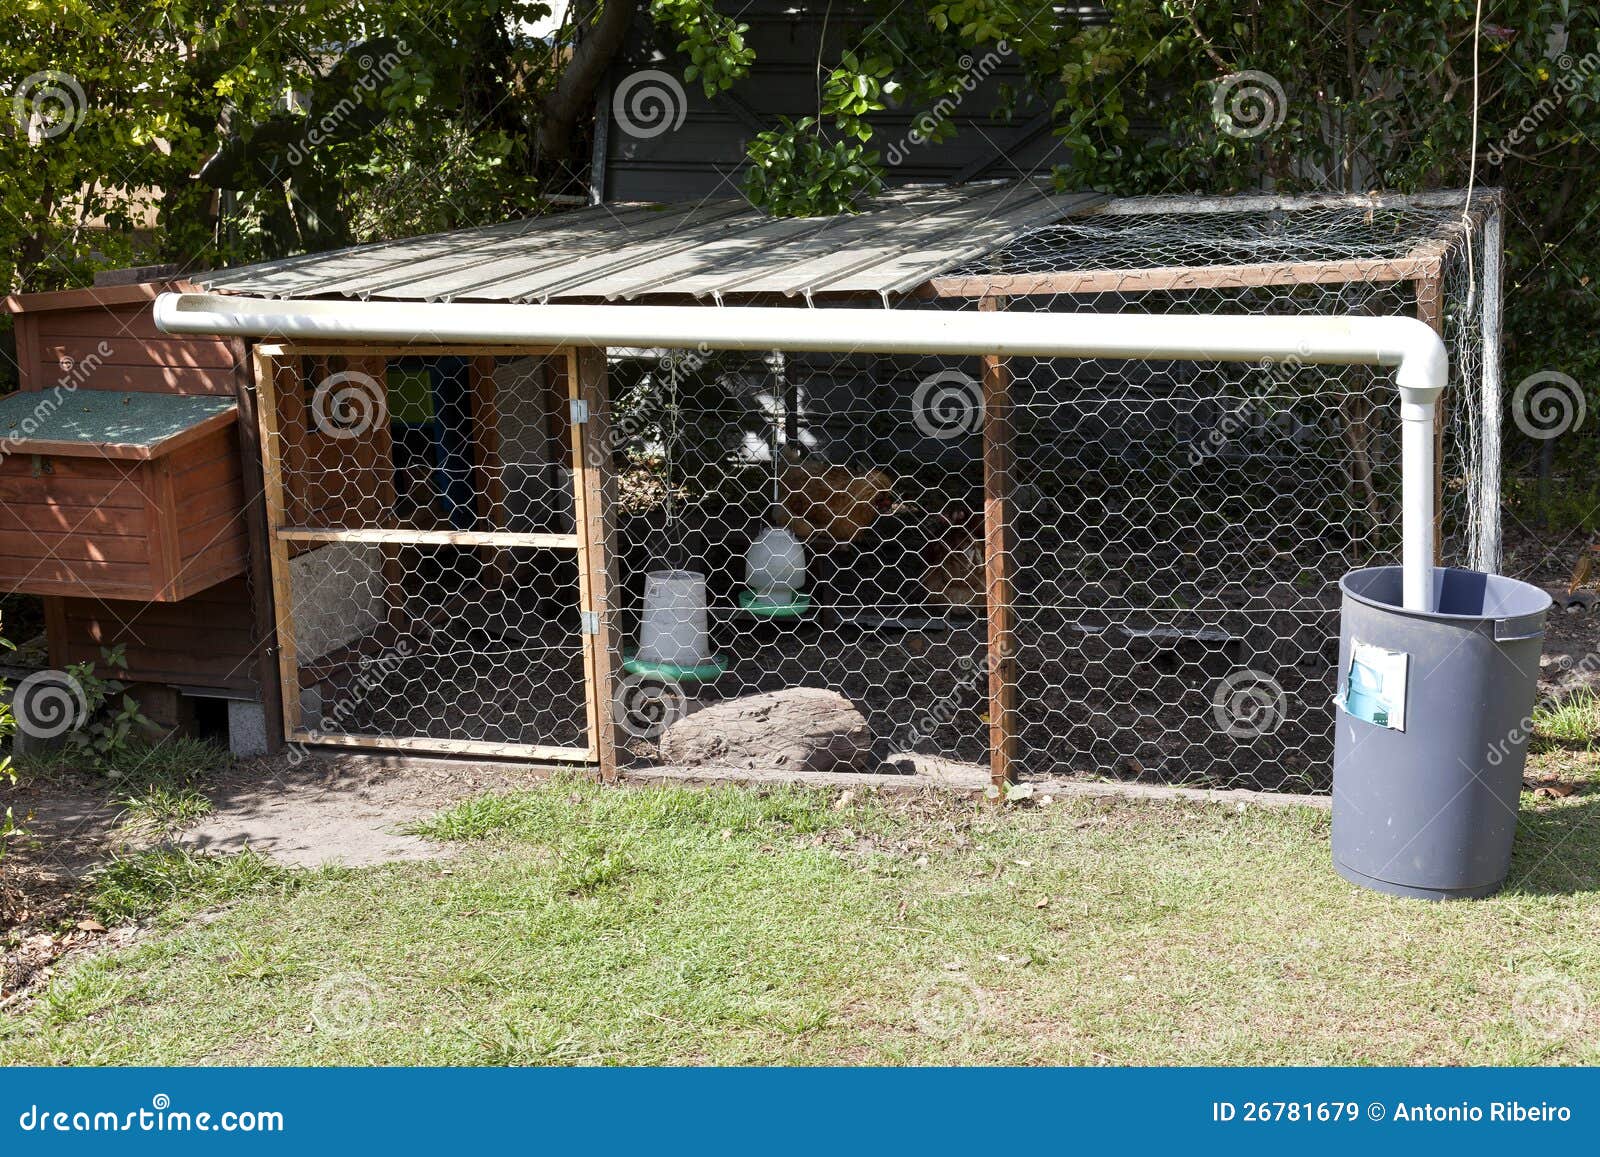 Chicken Coop Royalty Free Stock Images - Image: 26781679